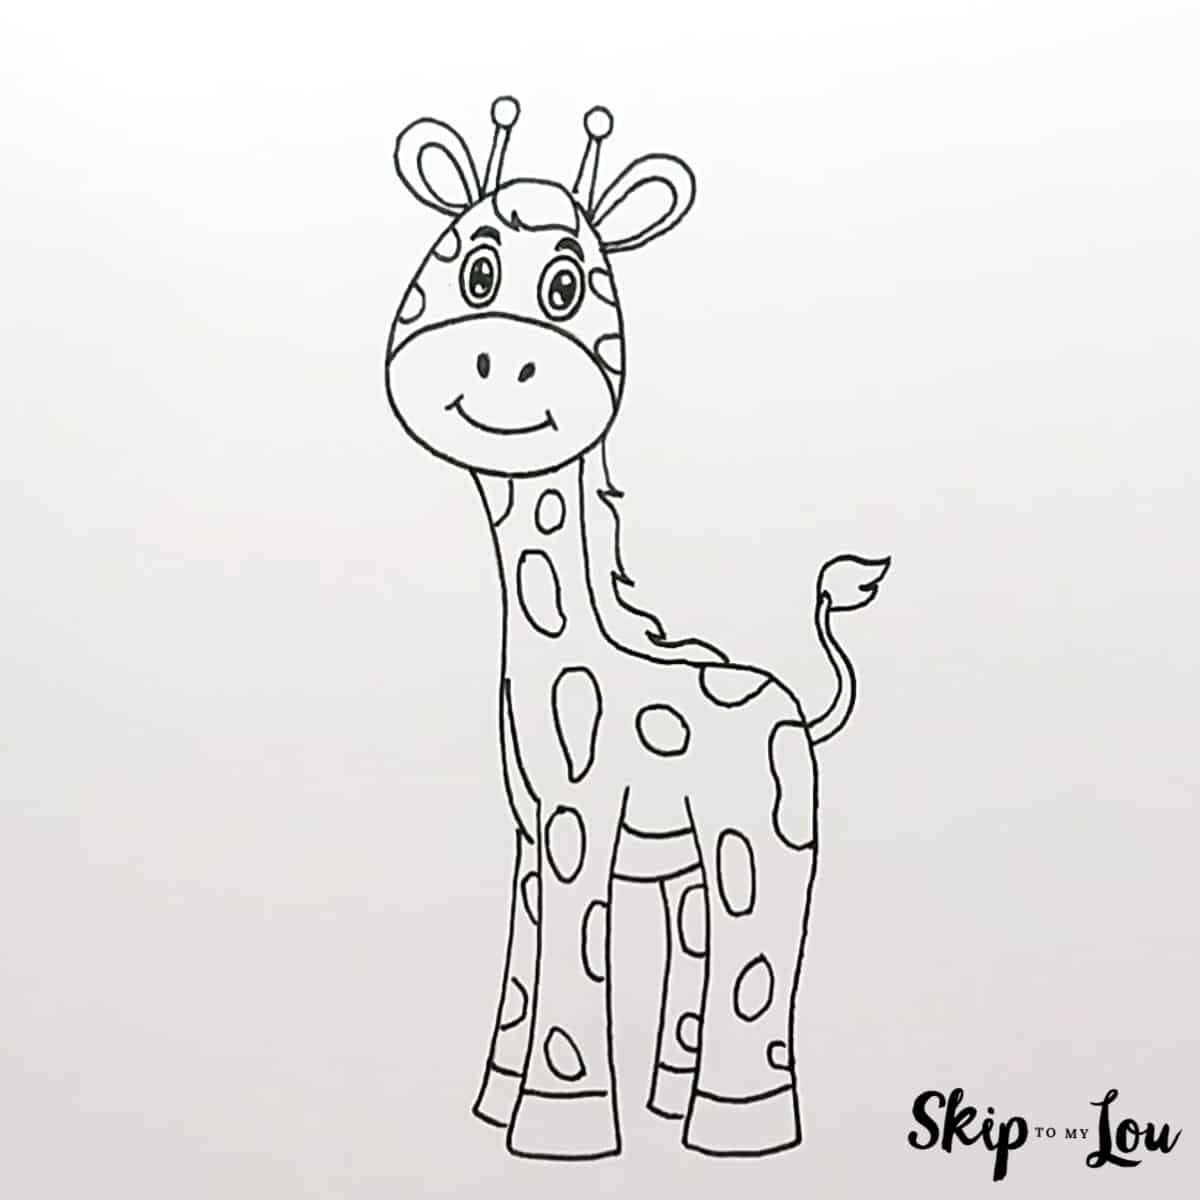 Cartoon Giraffe Drawing Guide - Step 6 - Outlined